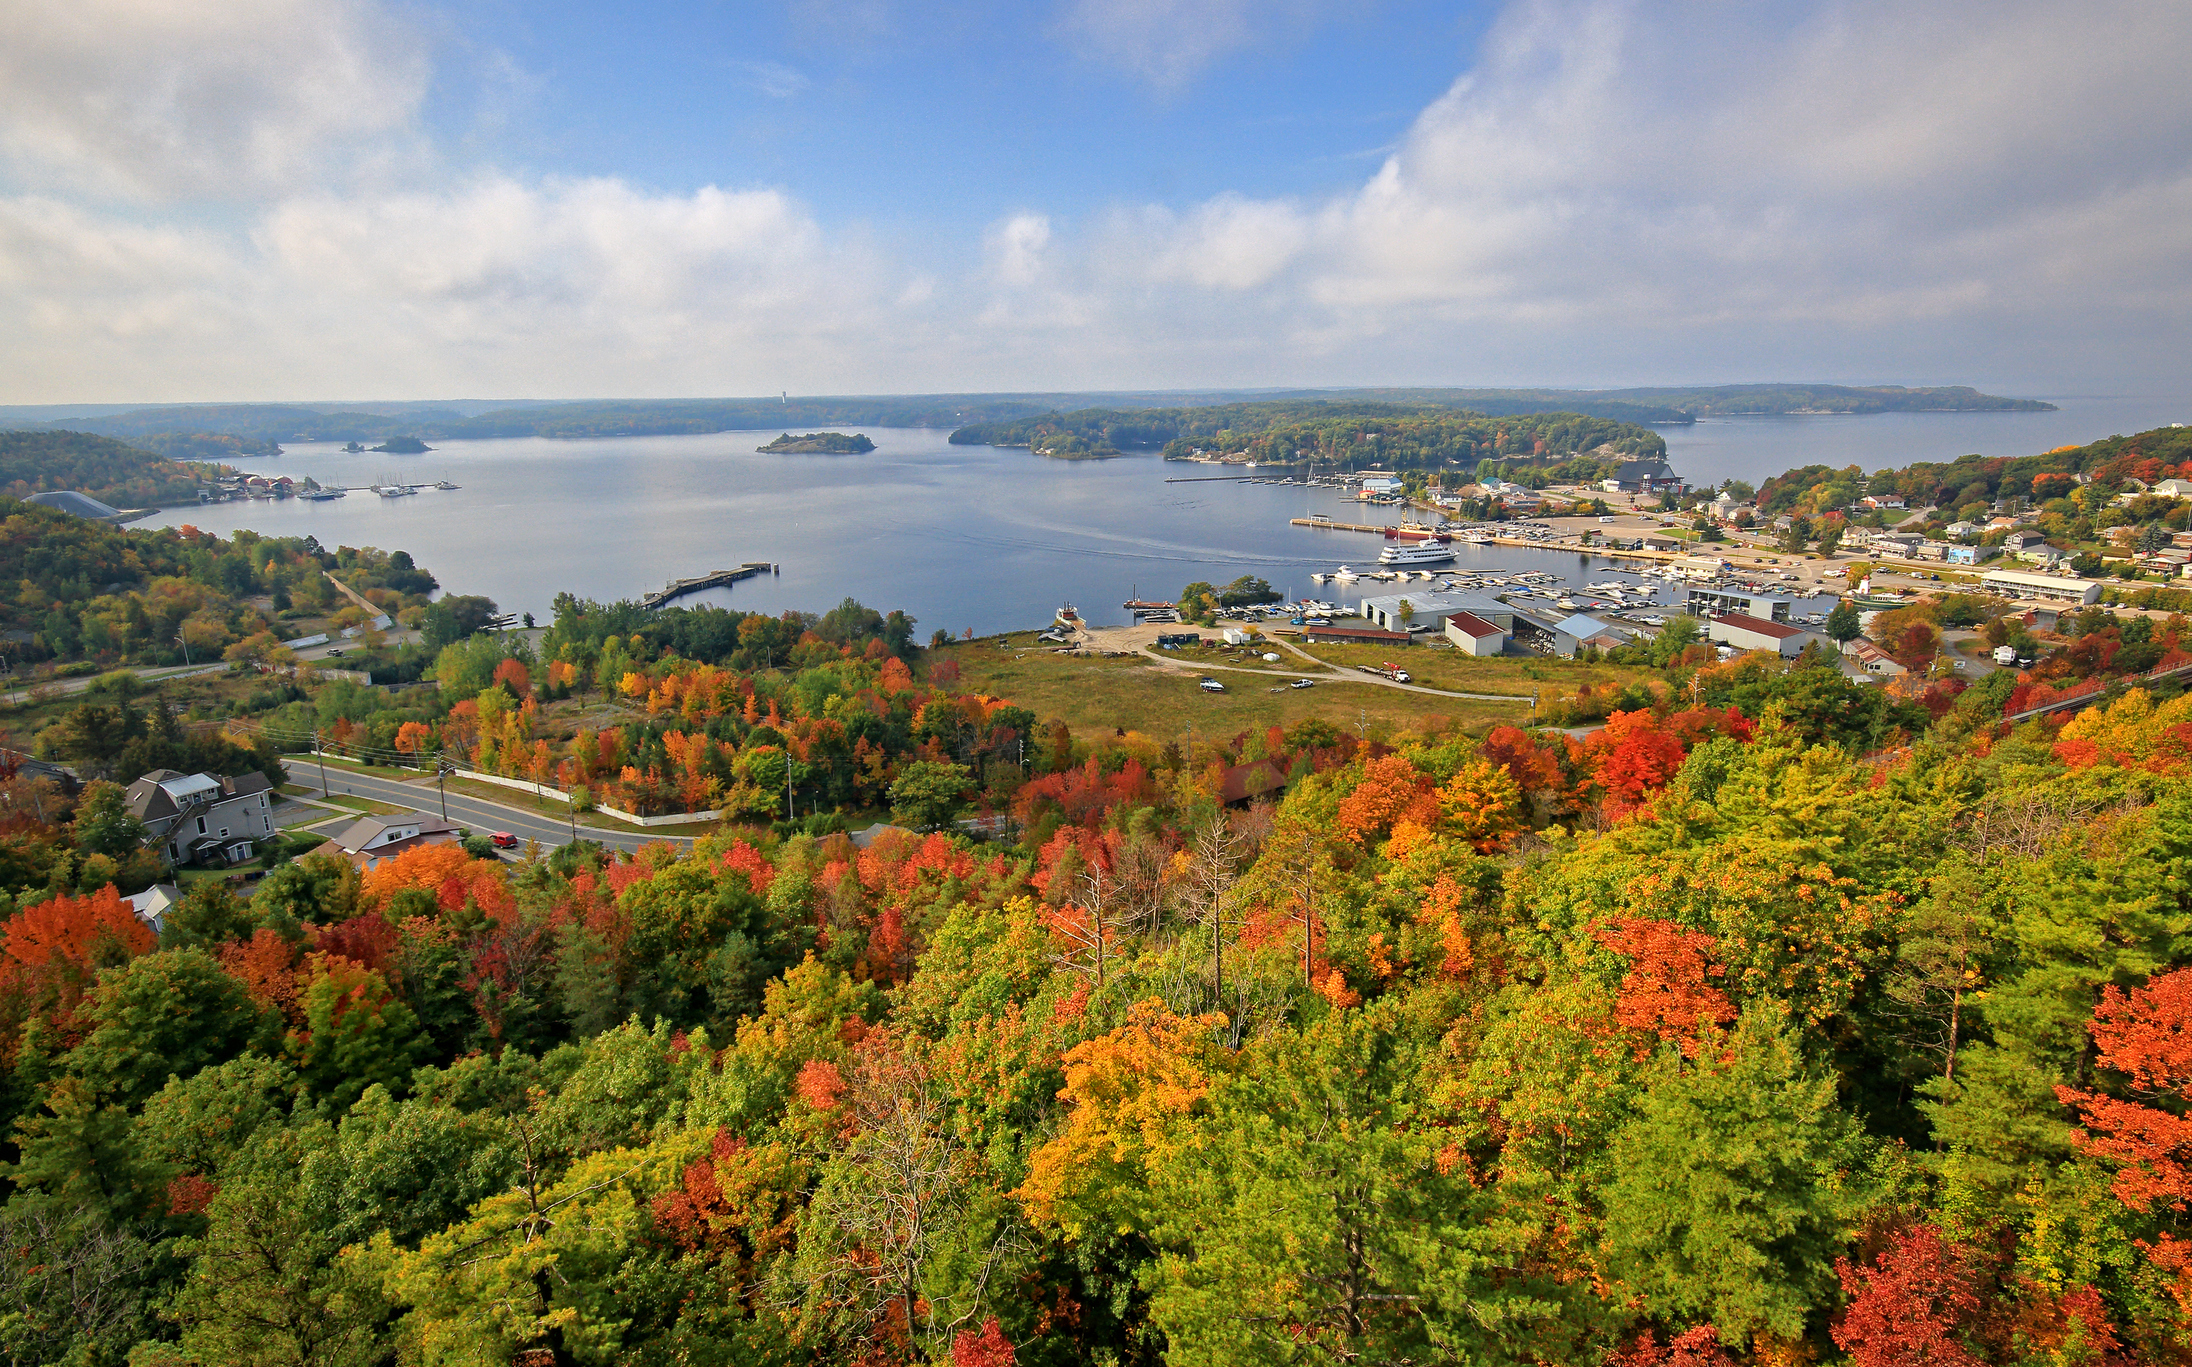 The Best Sights and Attractions in Canada and New England During The Fall Season